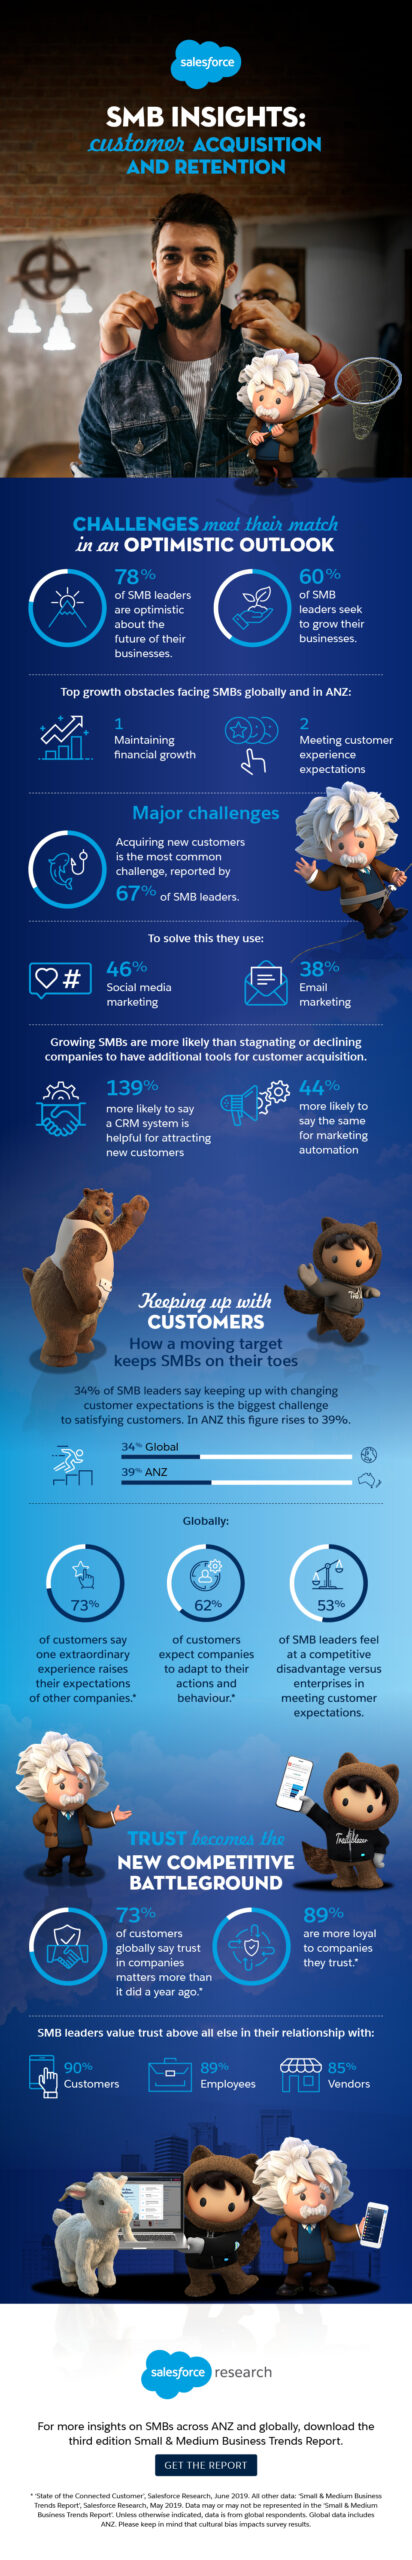 SMB Insights: Customer Acquisition and Retention